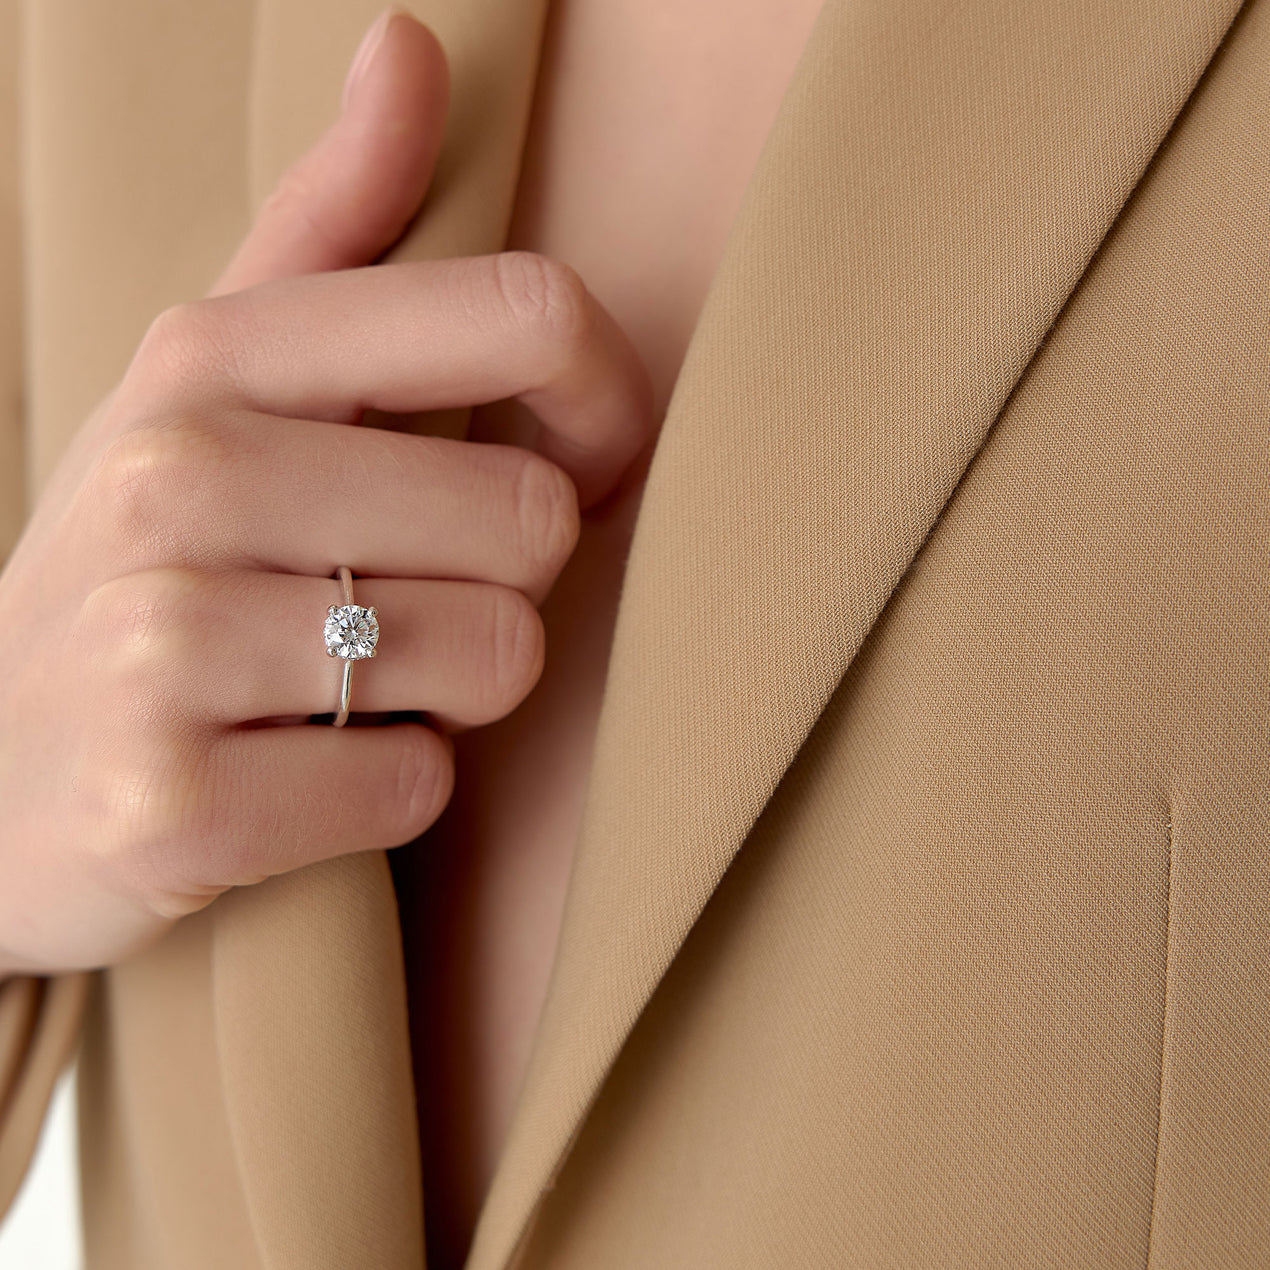 5 Engagement Ring Trends for Marriage Proposals in 2022